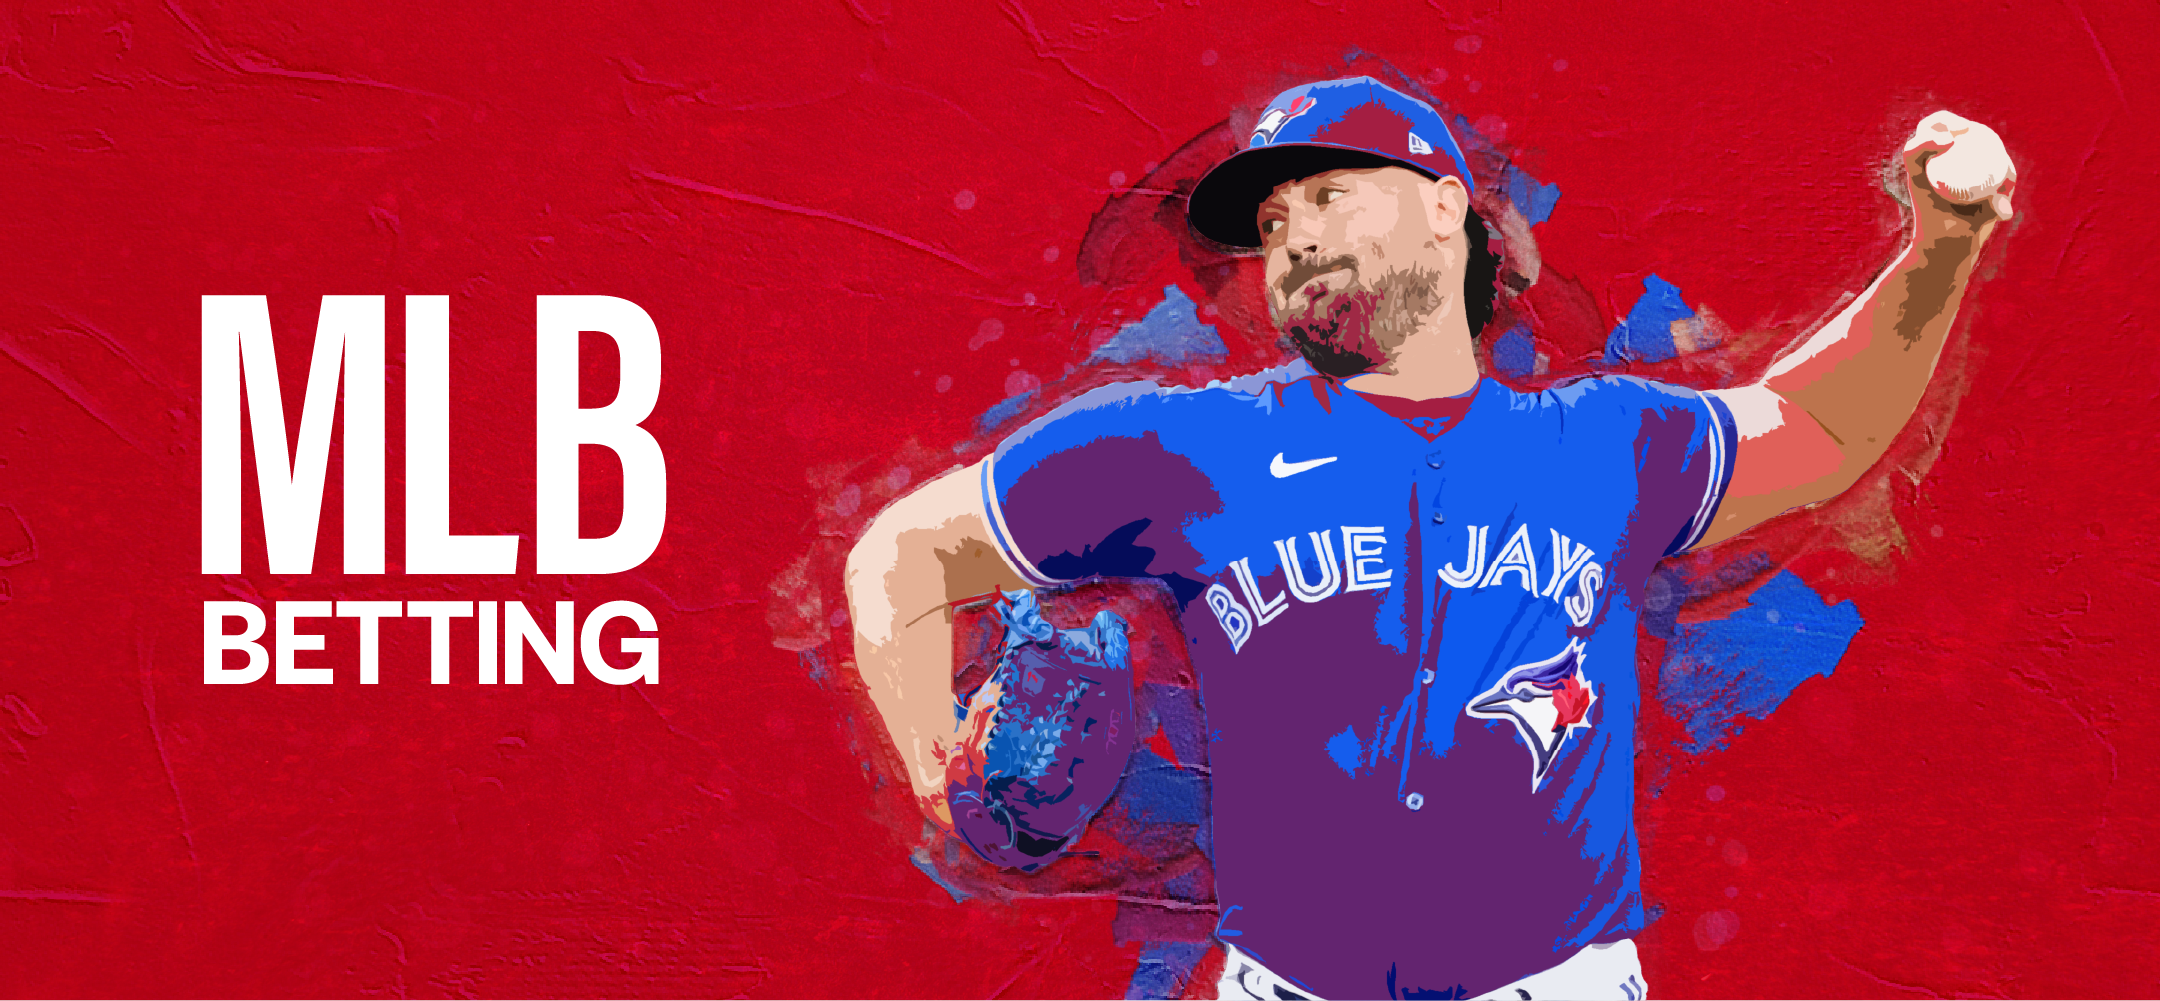 Bodog puts the Toronto Blue Jays under the microscope to look out their performance so far this season, while looking at what this means for your MLB betting. Dive in and get your edge today.